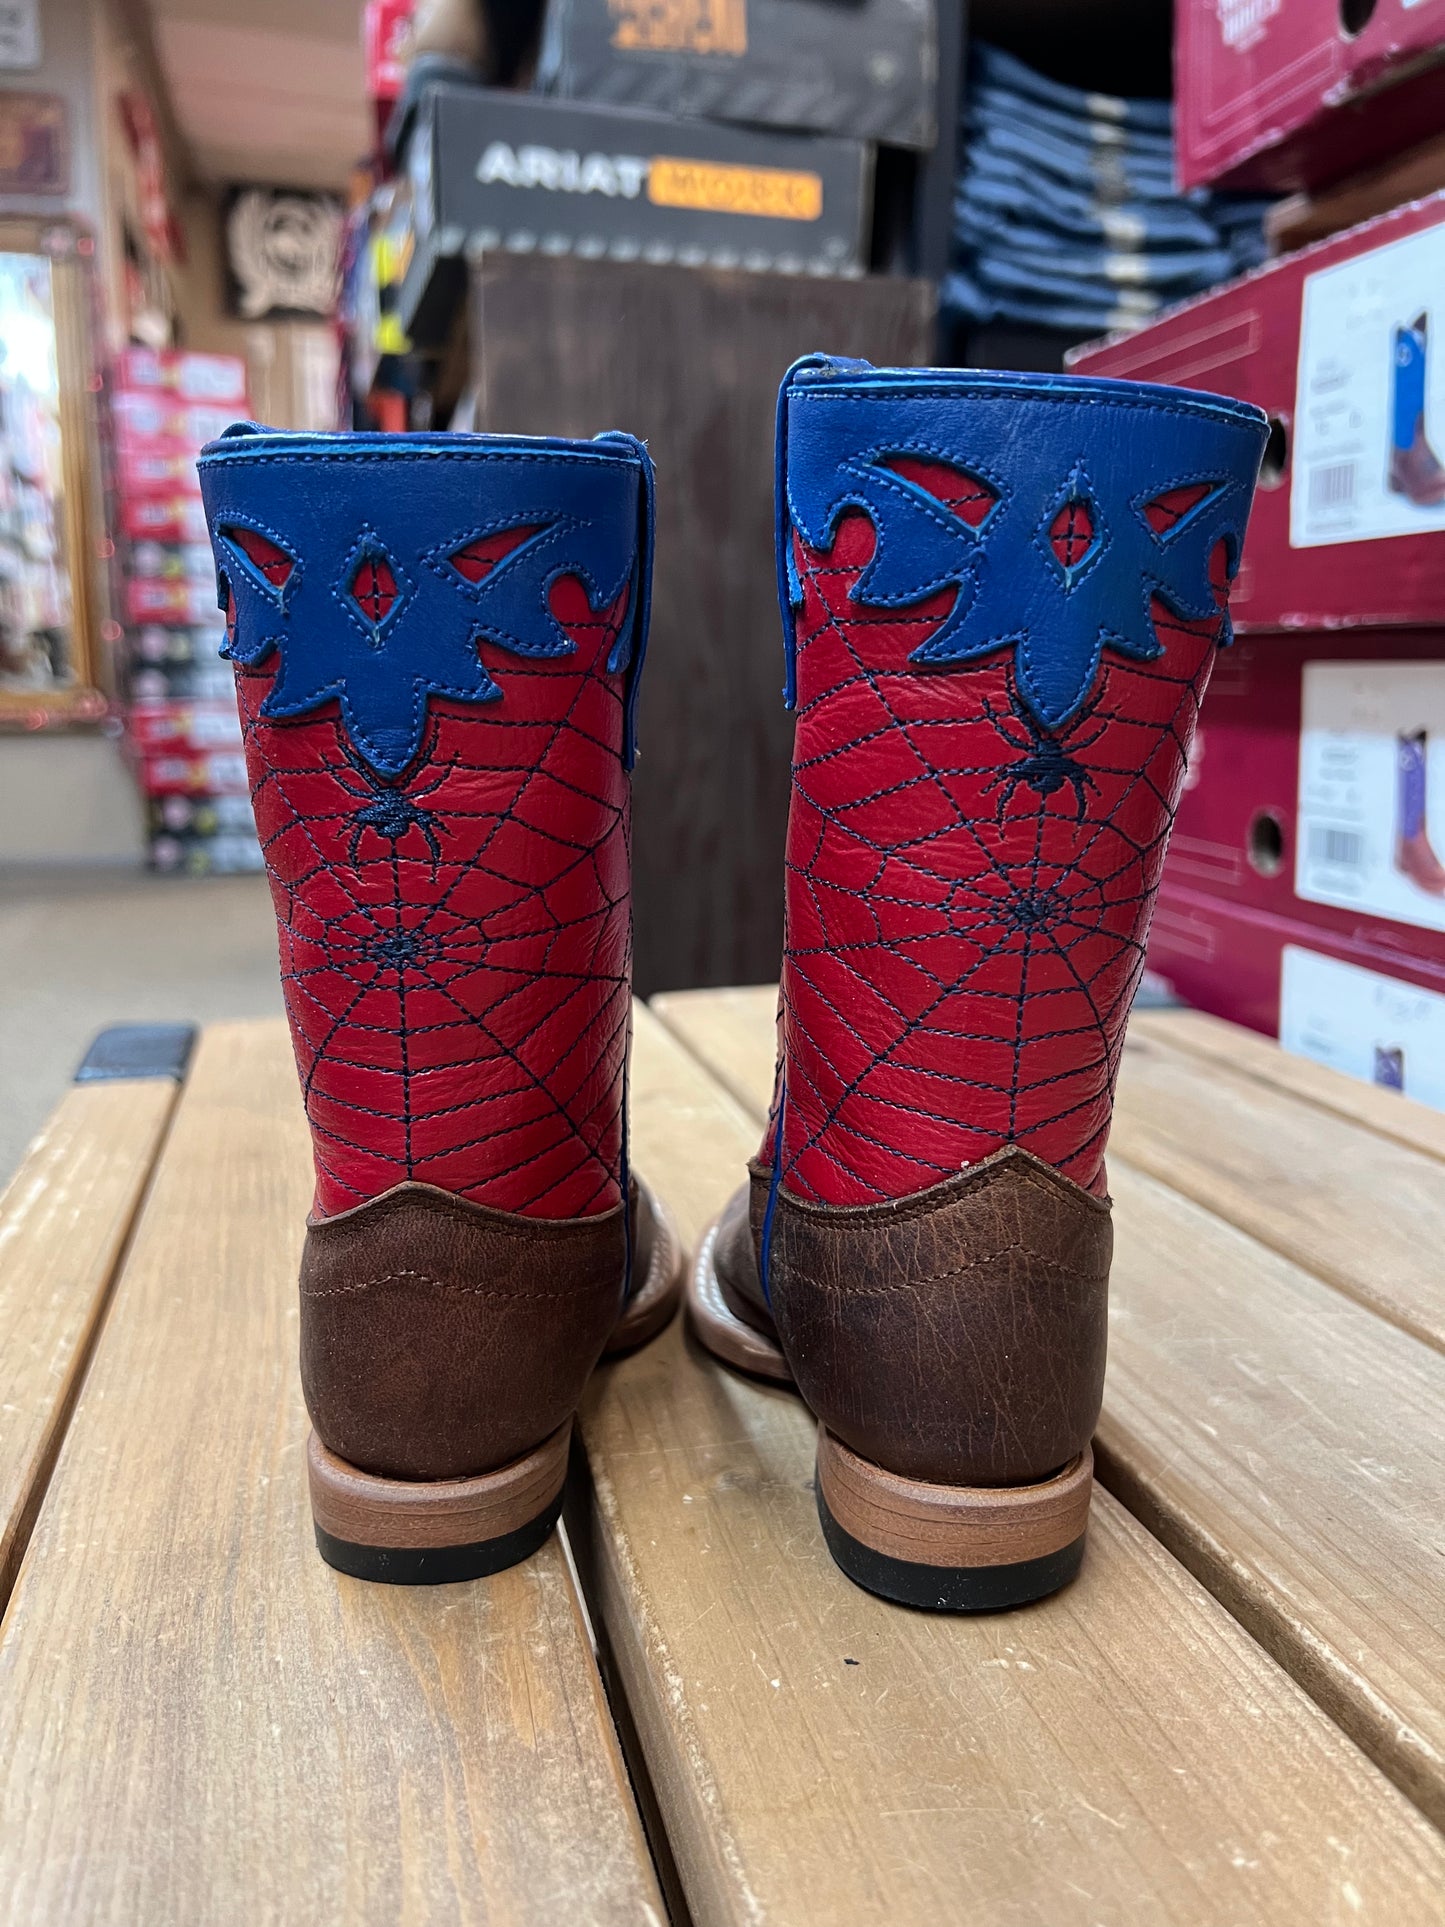 Olathe Kids Red Spider Tall Top Boots (Ok42)